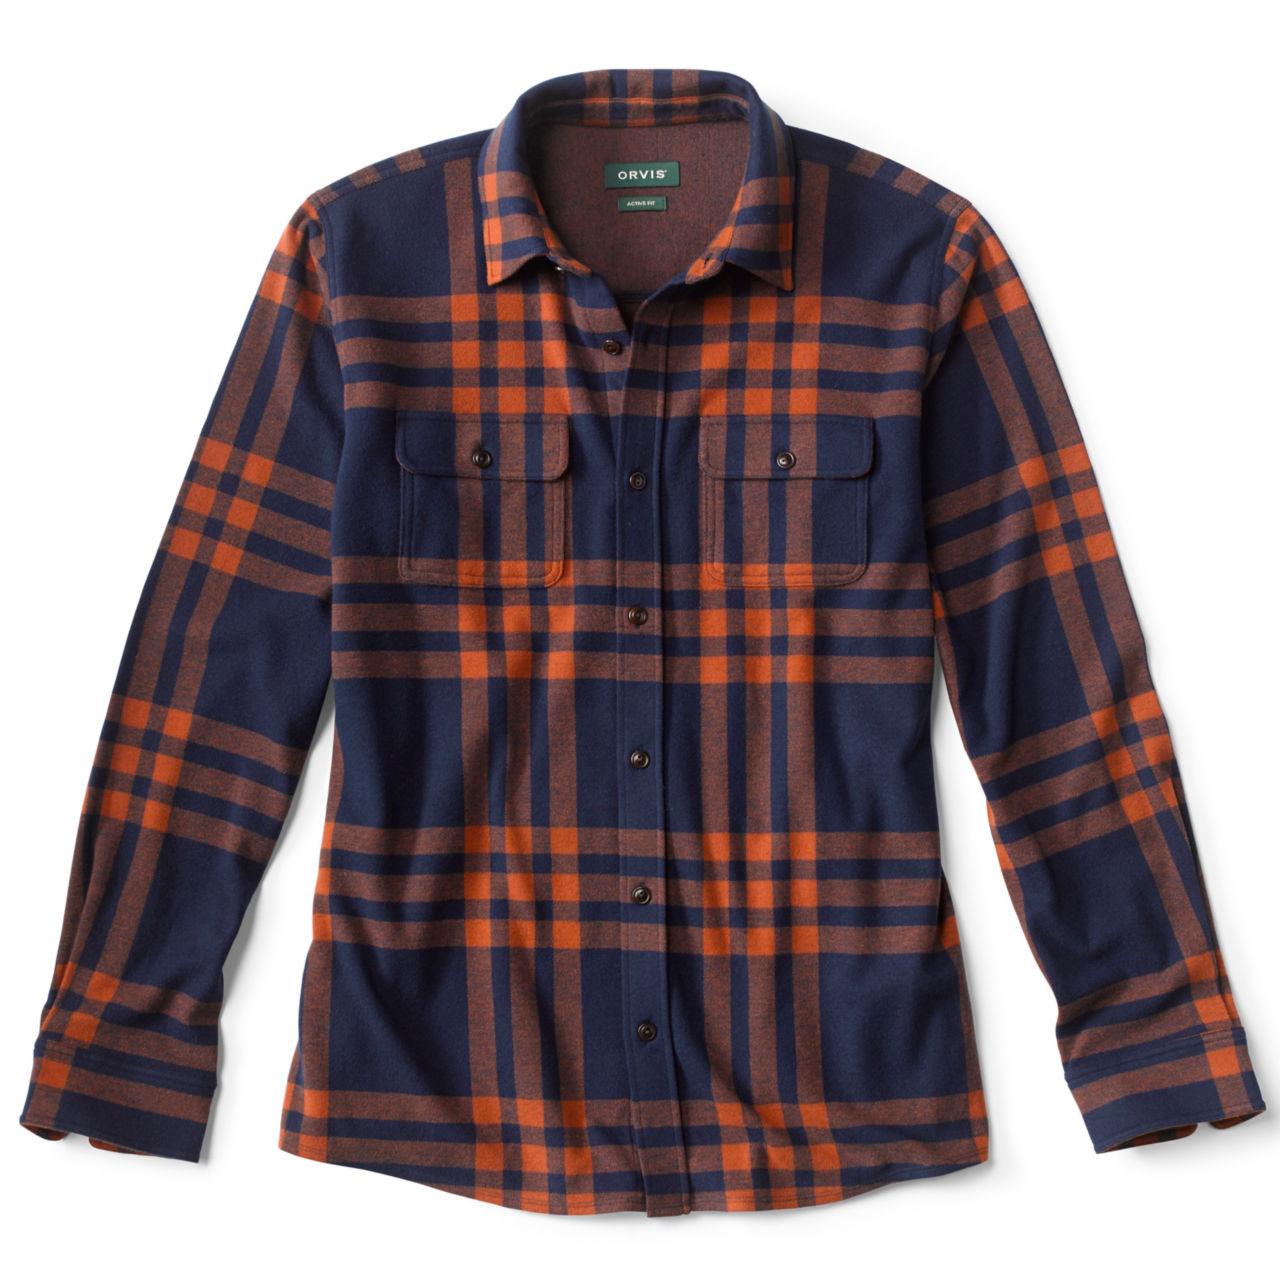 Snowy River Brushed Knit Long-Sleeved Shirt - NAVY PLAID image number 0